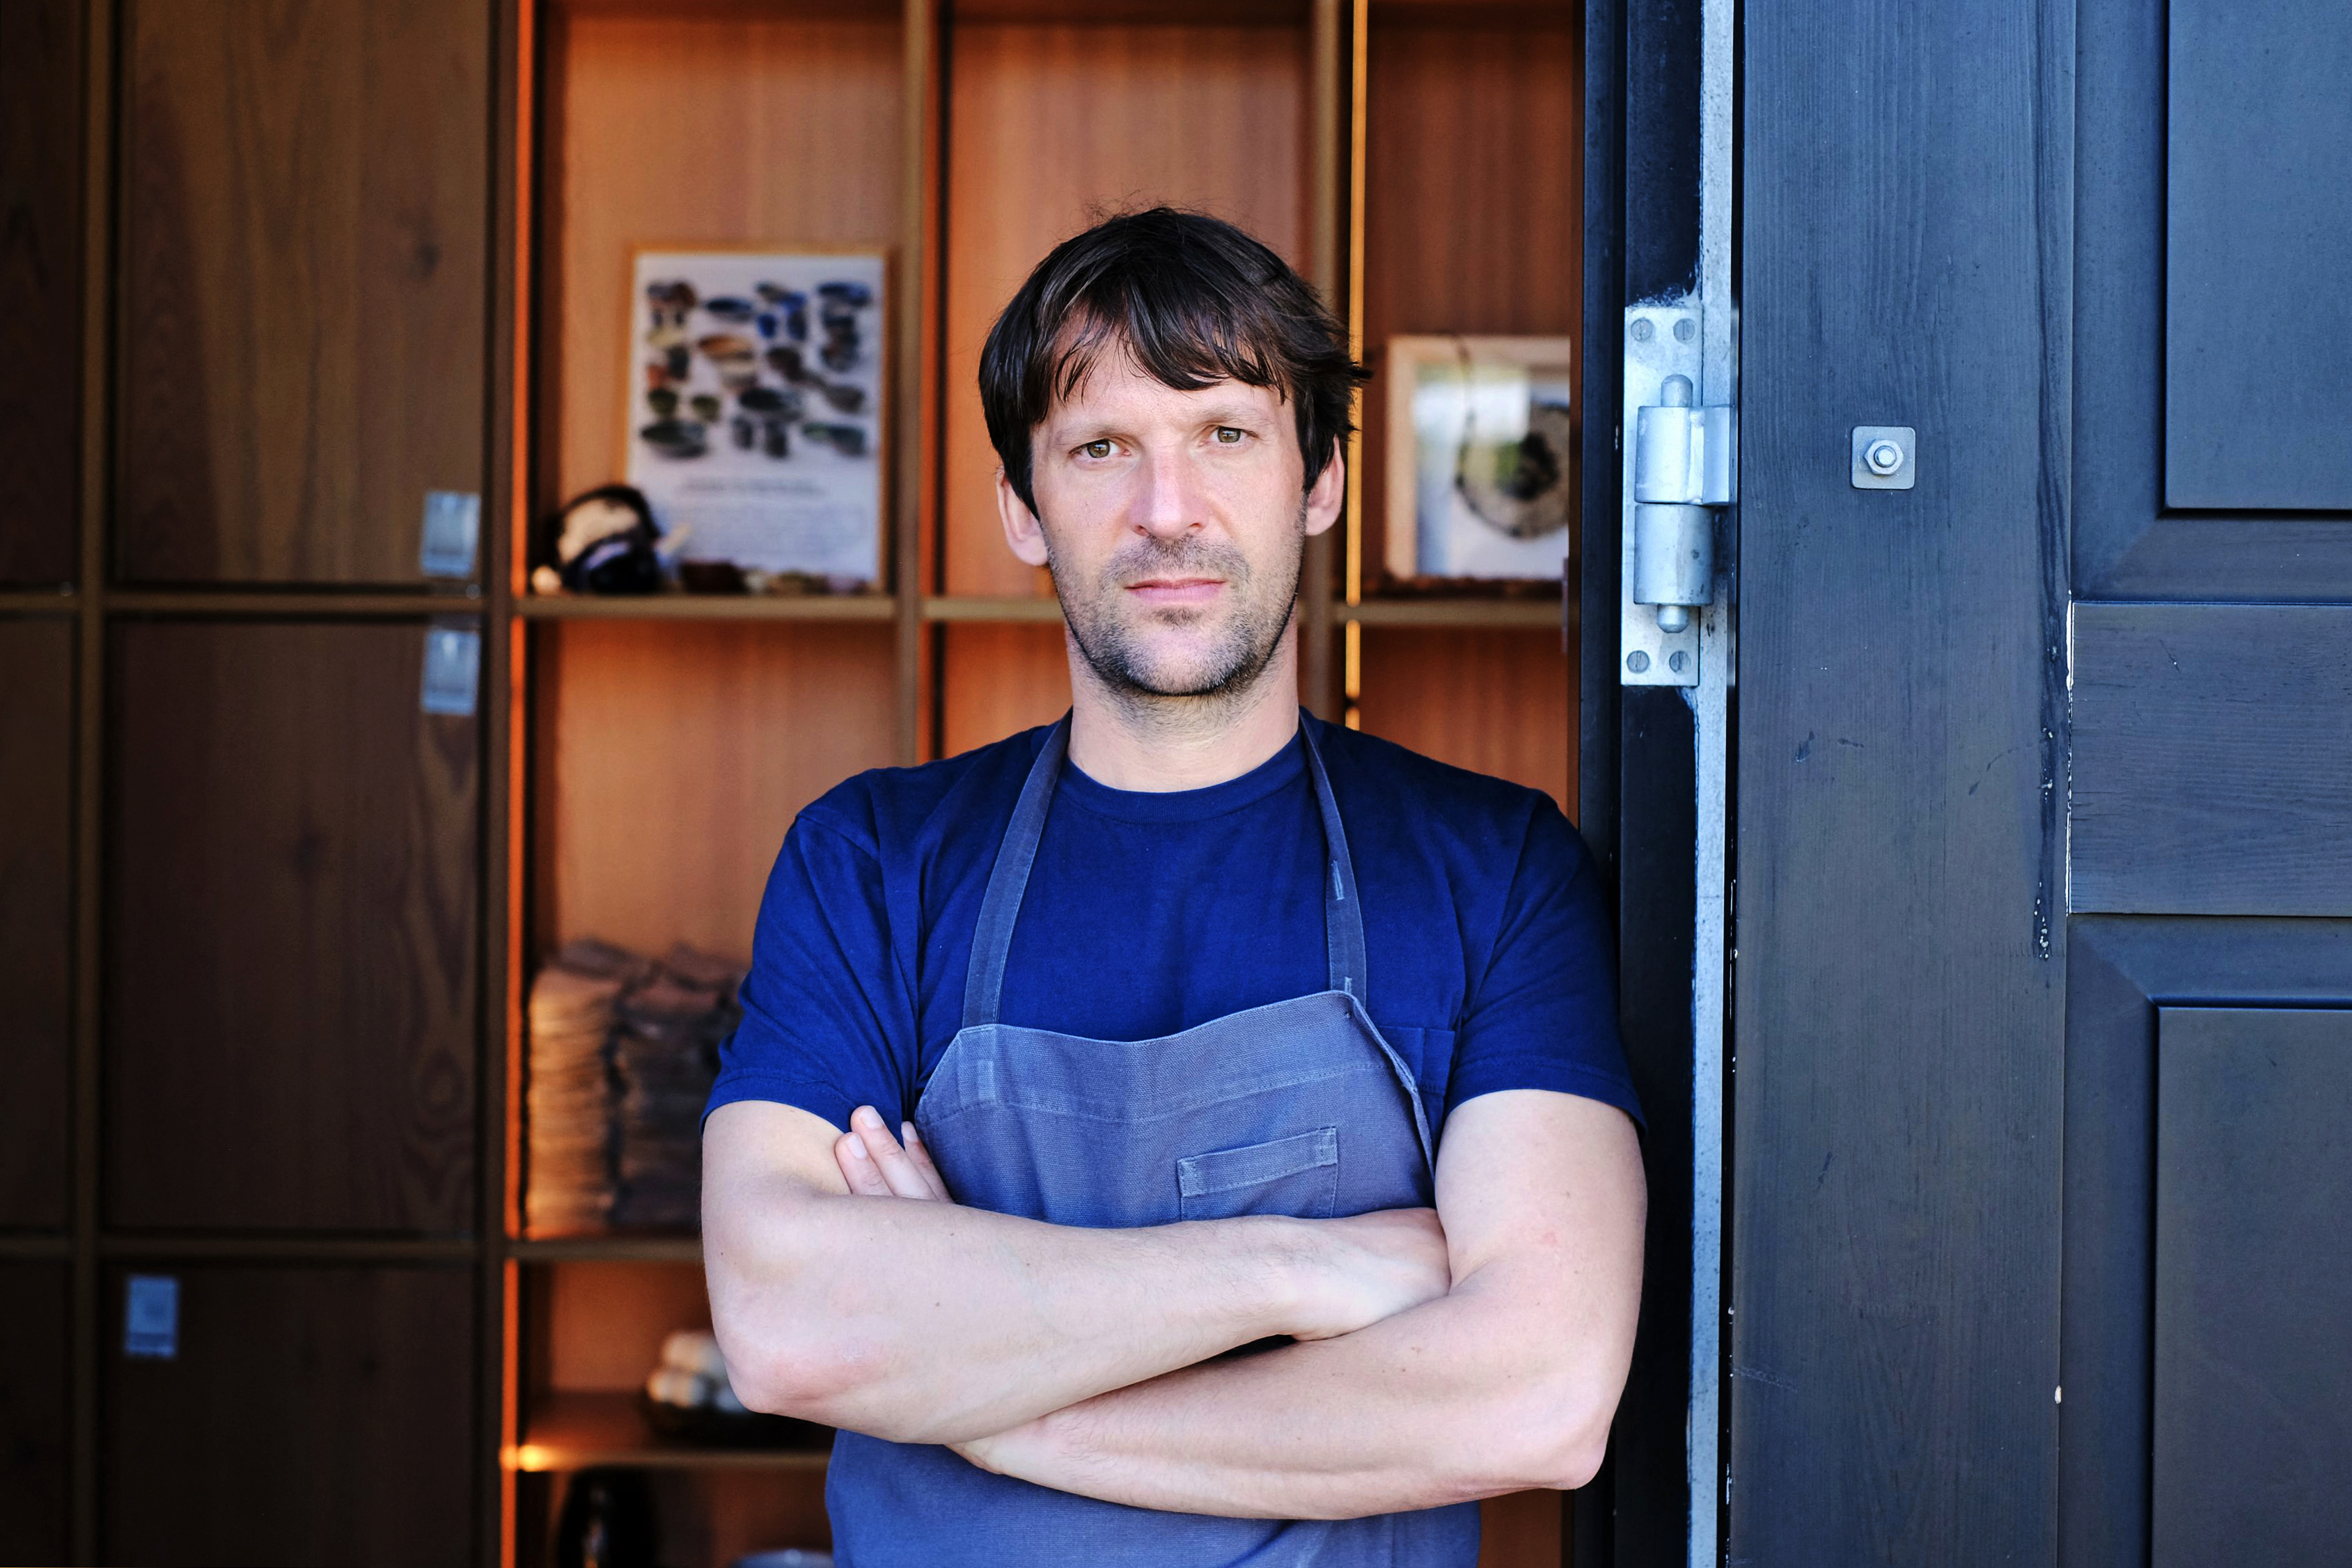 Rene Redzepi stands in a doorway, wearing an apron and crossing his arms.